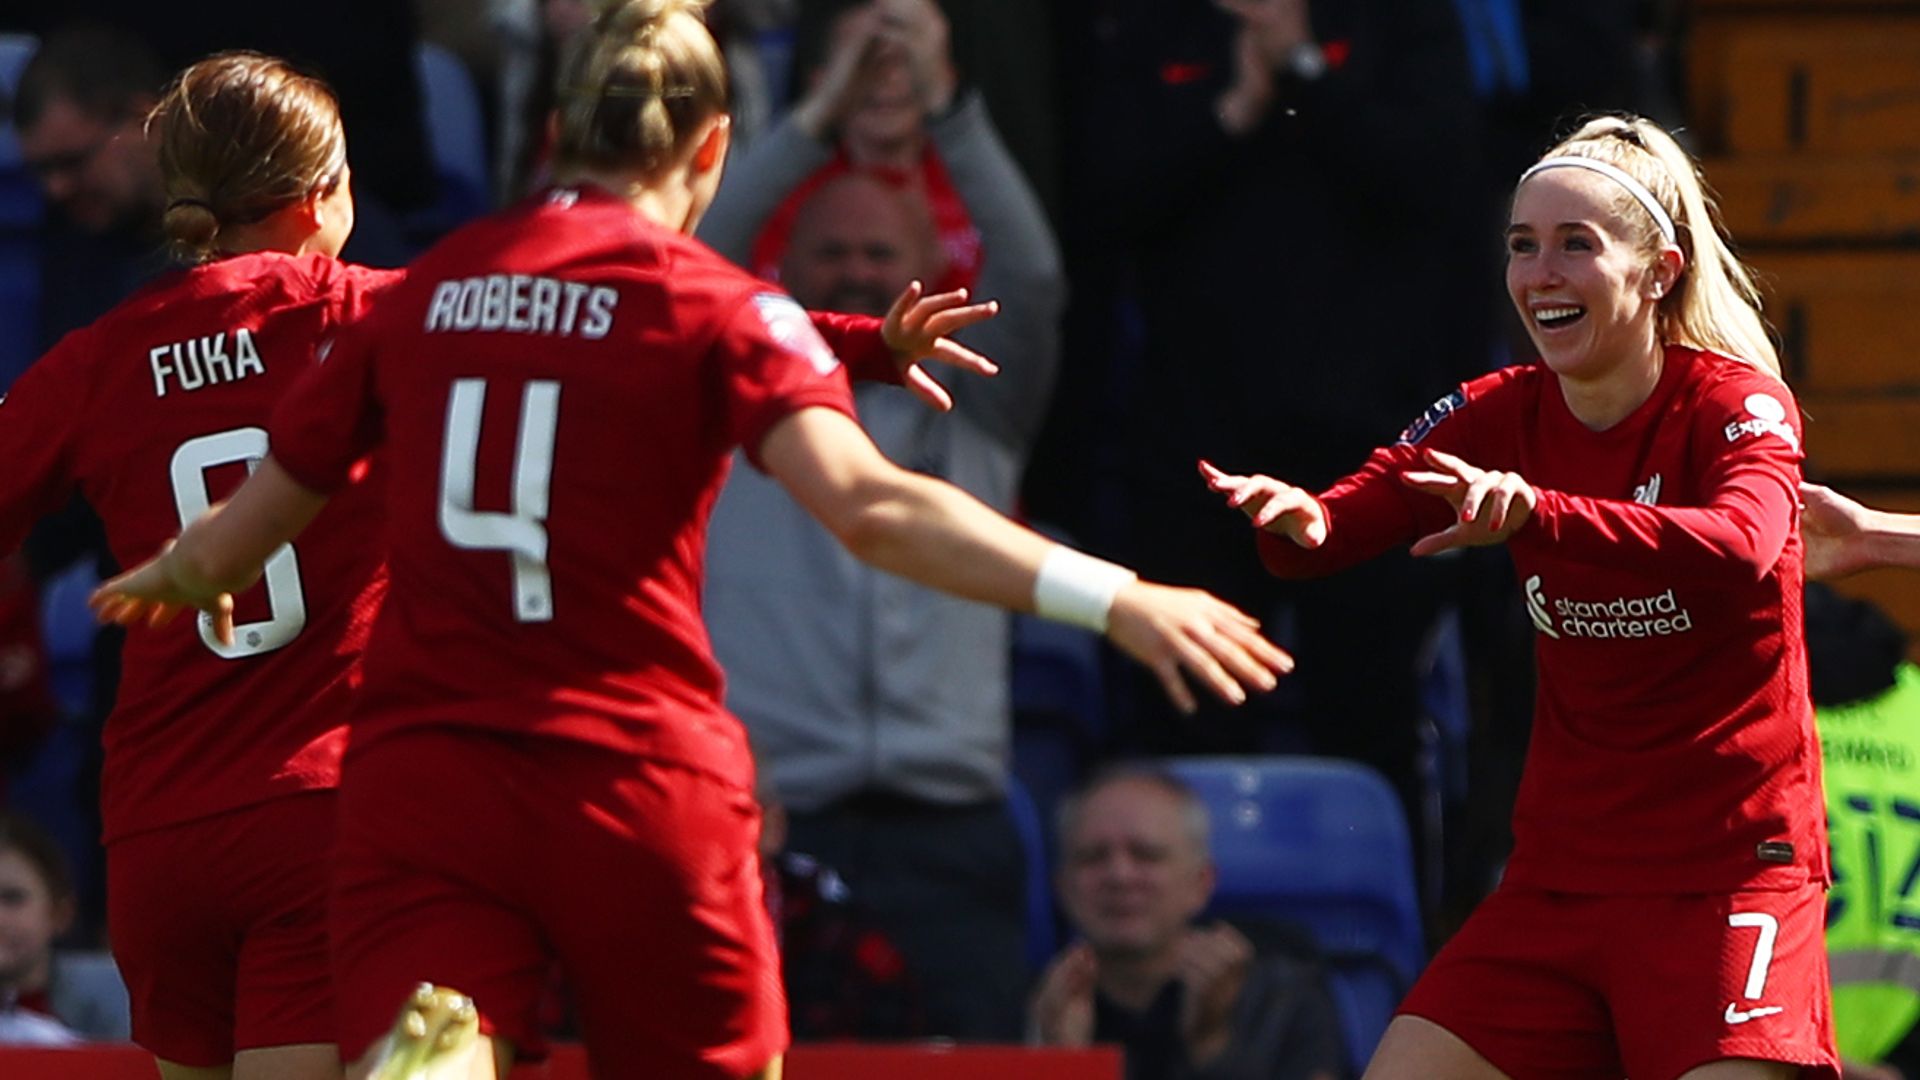 Man City stunned at Liverpool to leave WSL title hopes in tatters